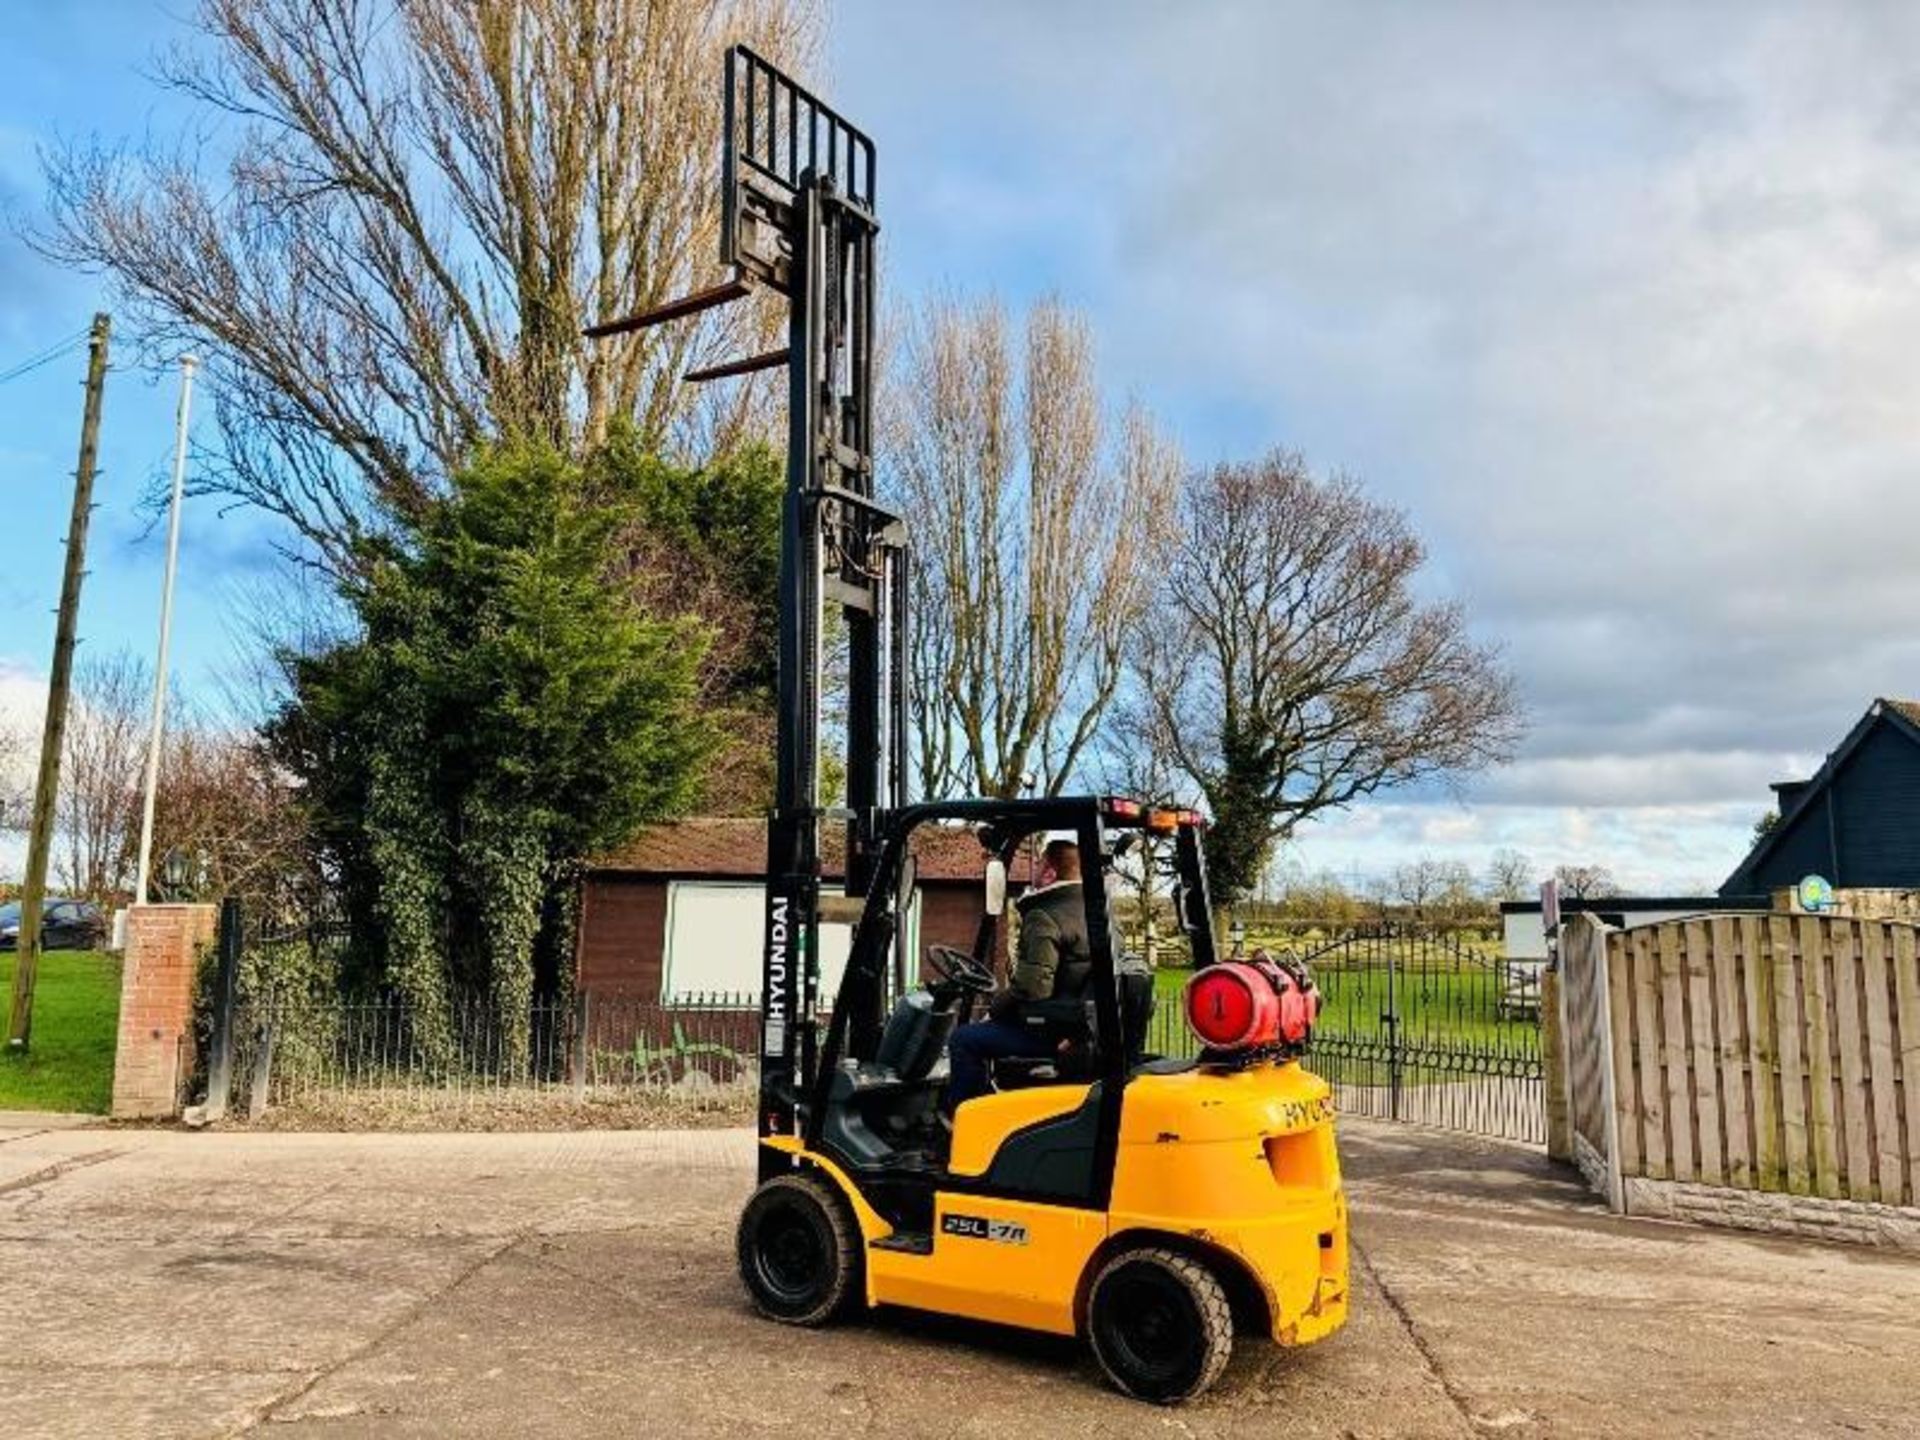 HYUNDAI 25L-7A CONTAINER SPEC FORKLIFT *YEAR 2018, 2172 HOURS* C/W SIDE SHIFT - Image 15 of 17